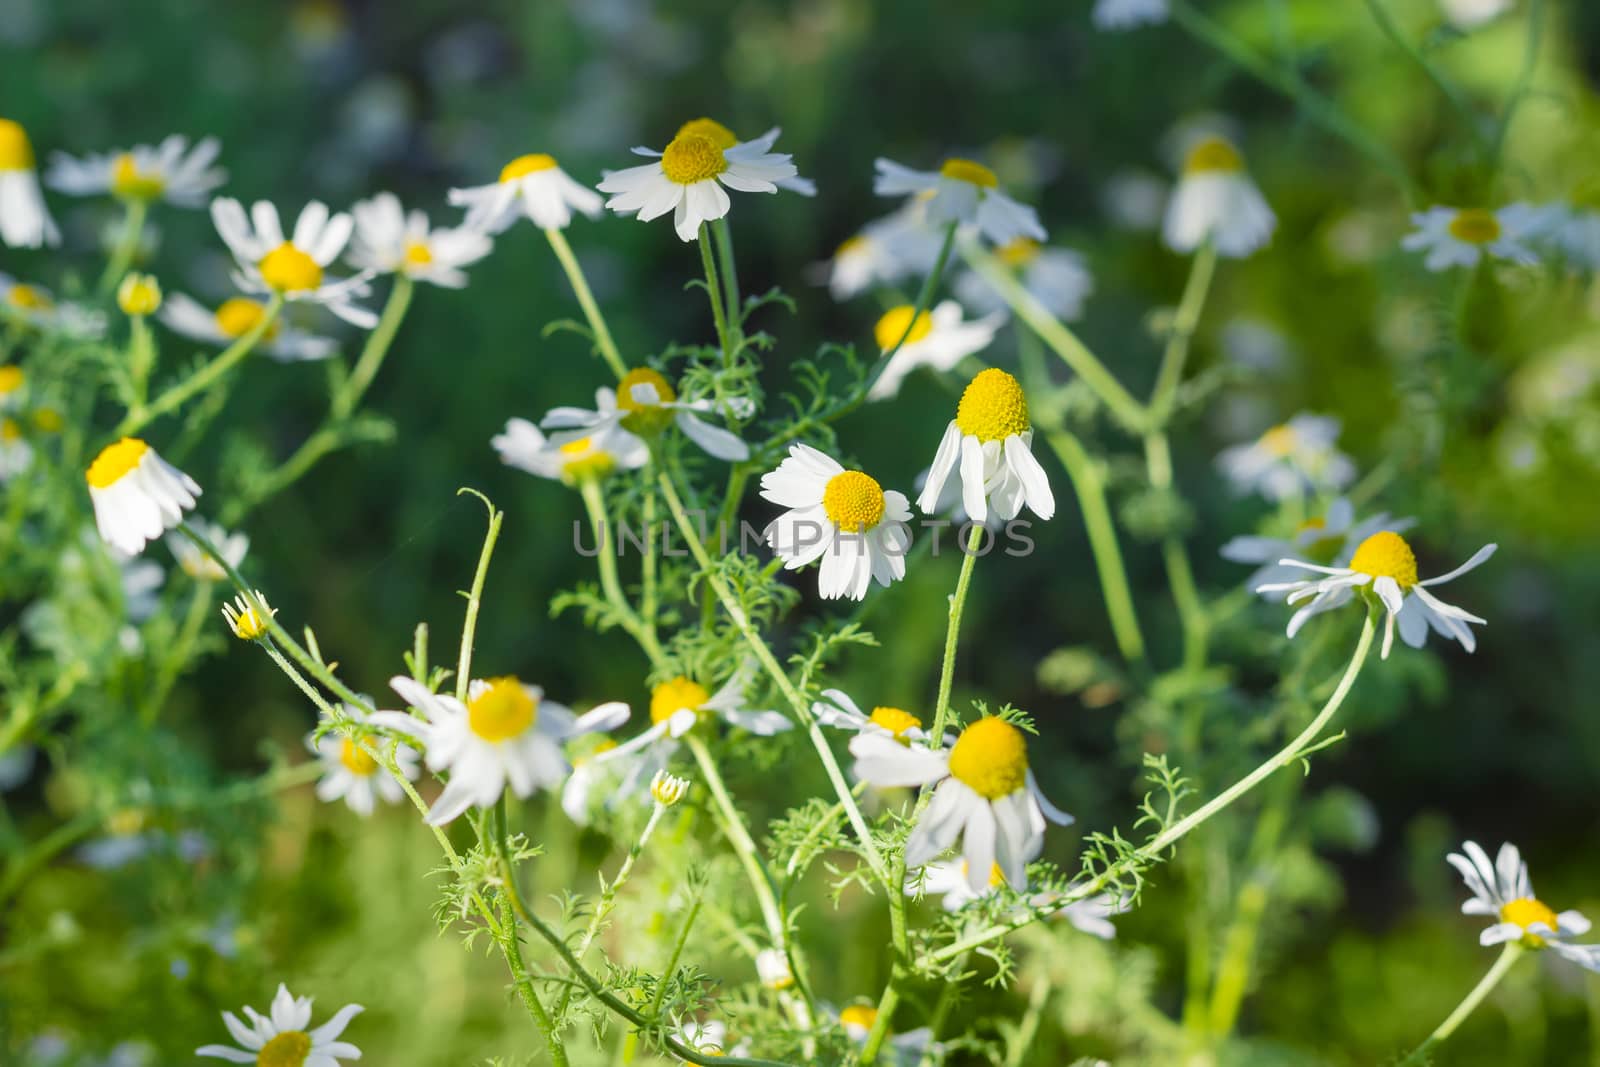 Stalks of blossoming chamomile on a dark background at shallow depth of field
